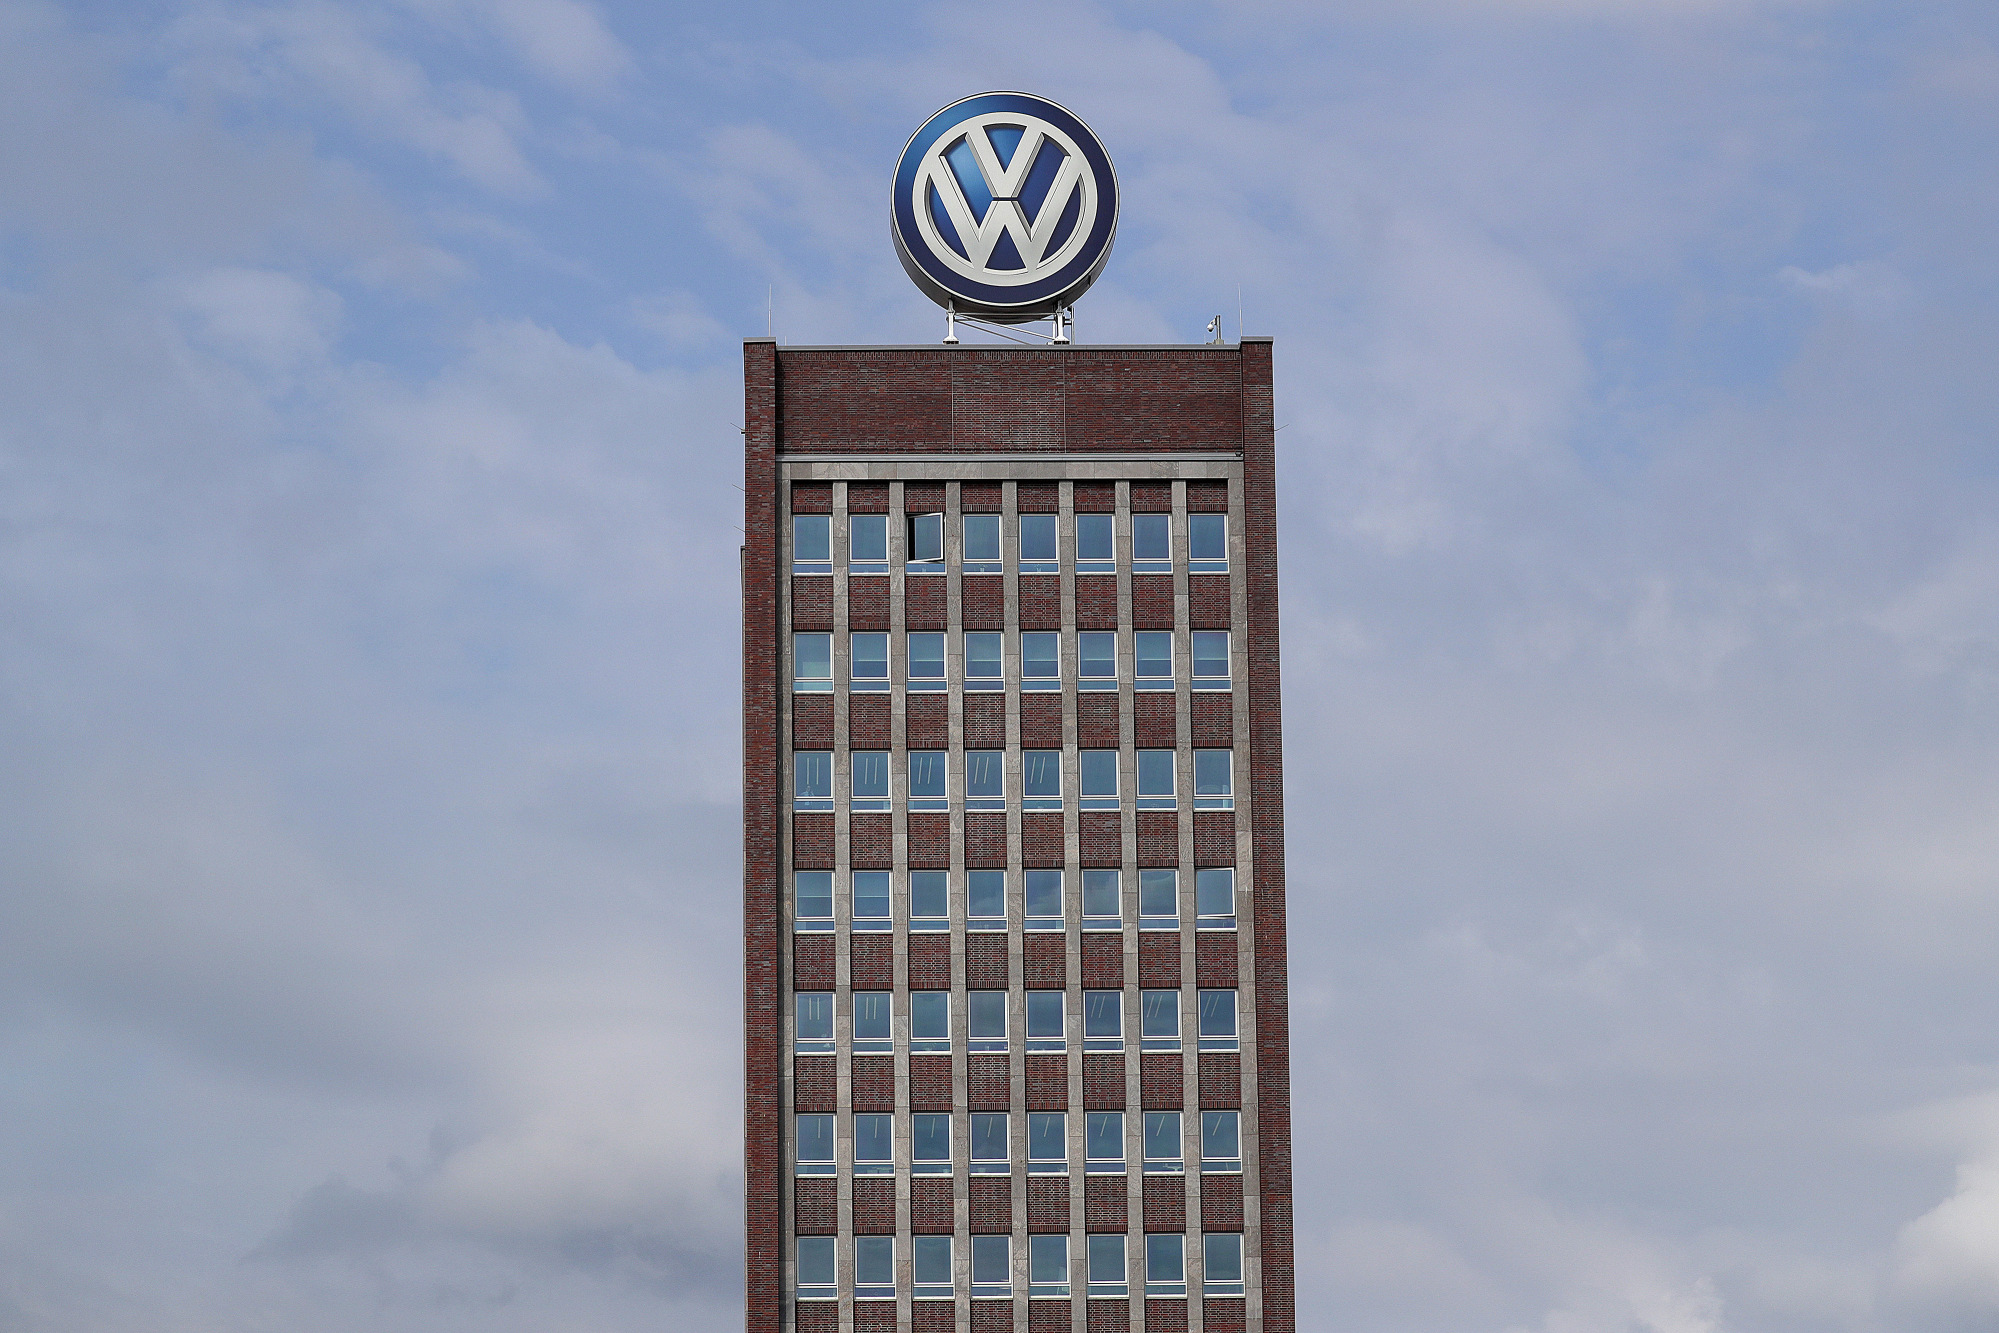 VW is changing its logo for the first time since 2000, but it's